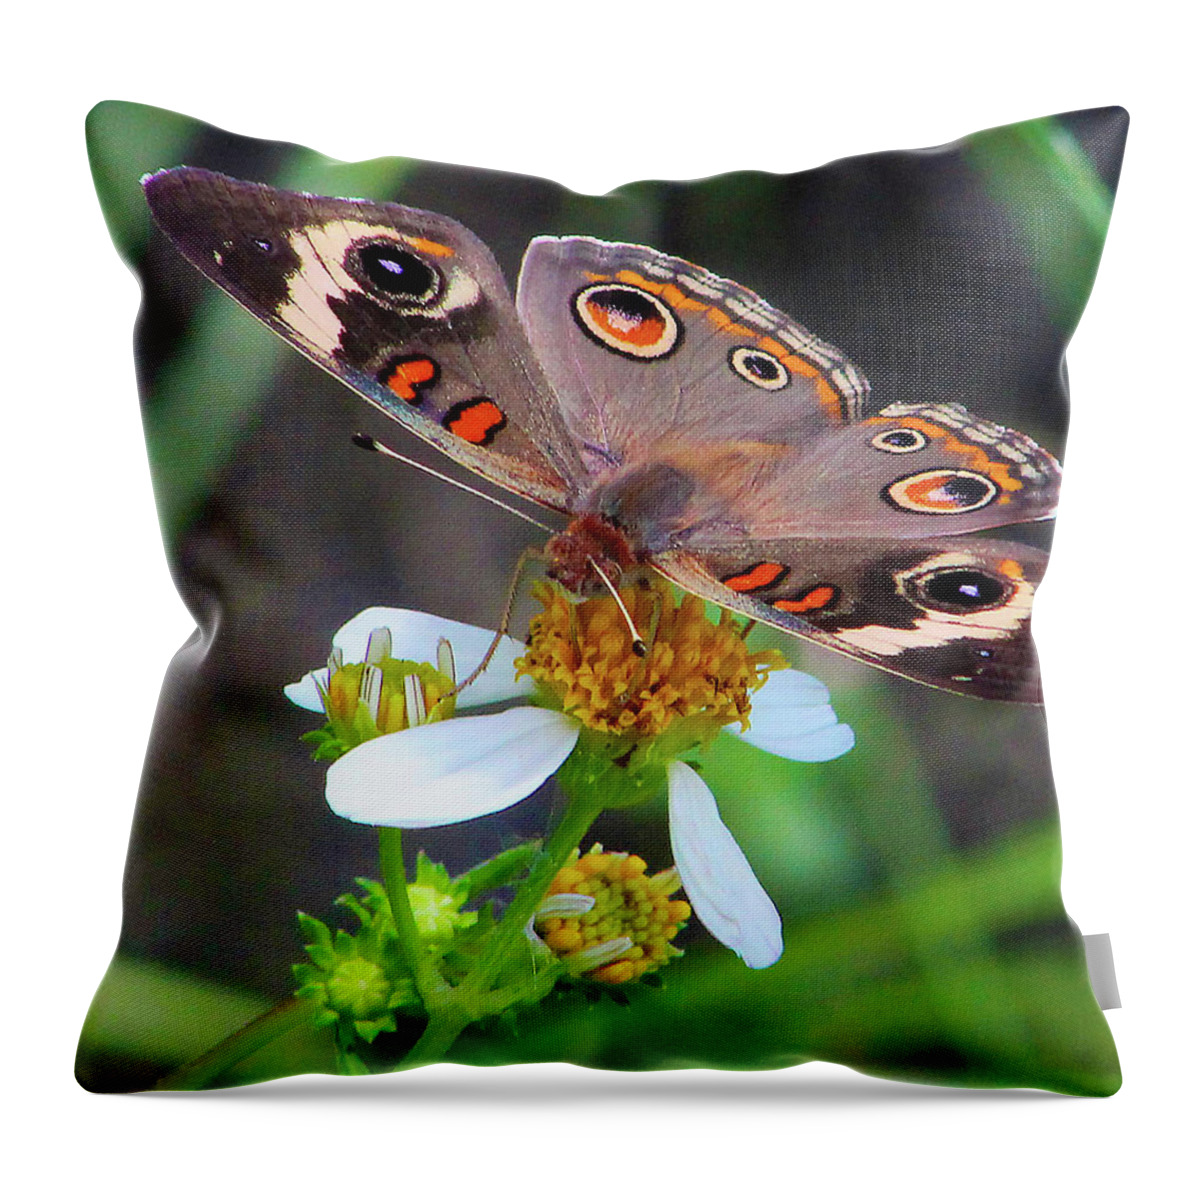 Butterfly Throw Pillow featuring the photograph Uncommon Buckeye by Michael Allard